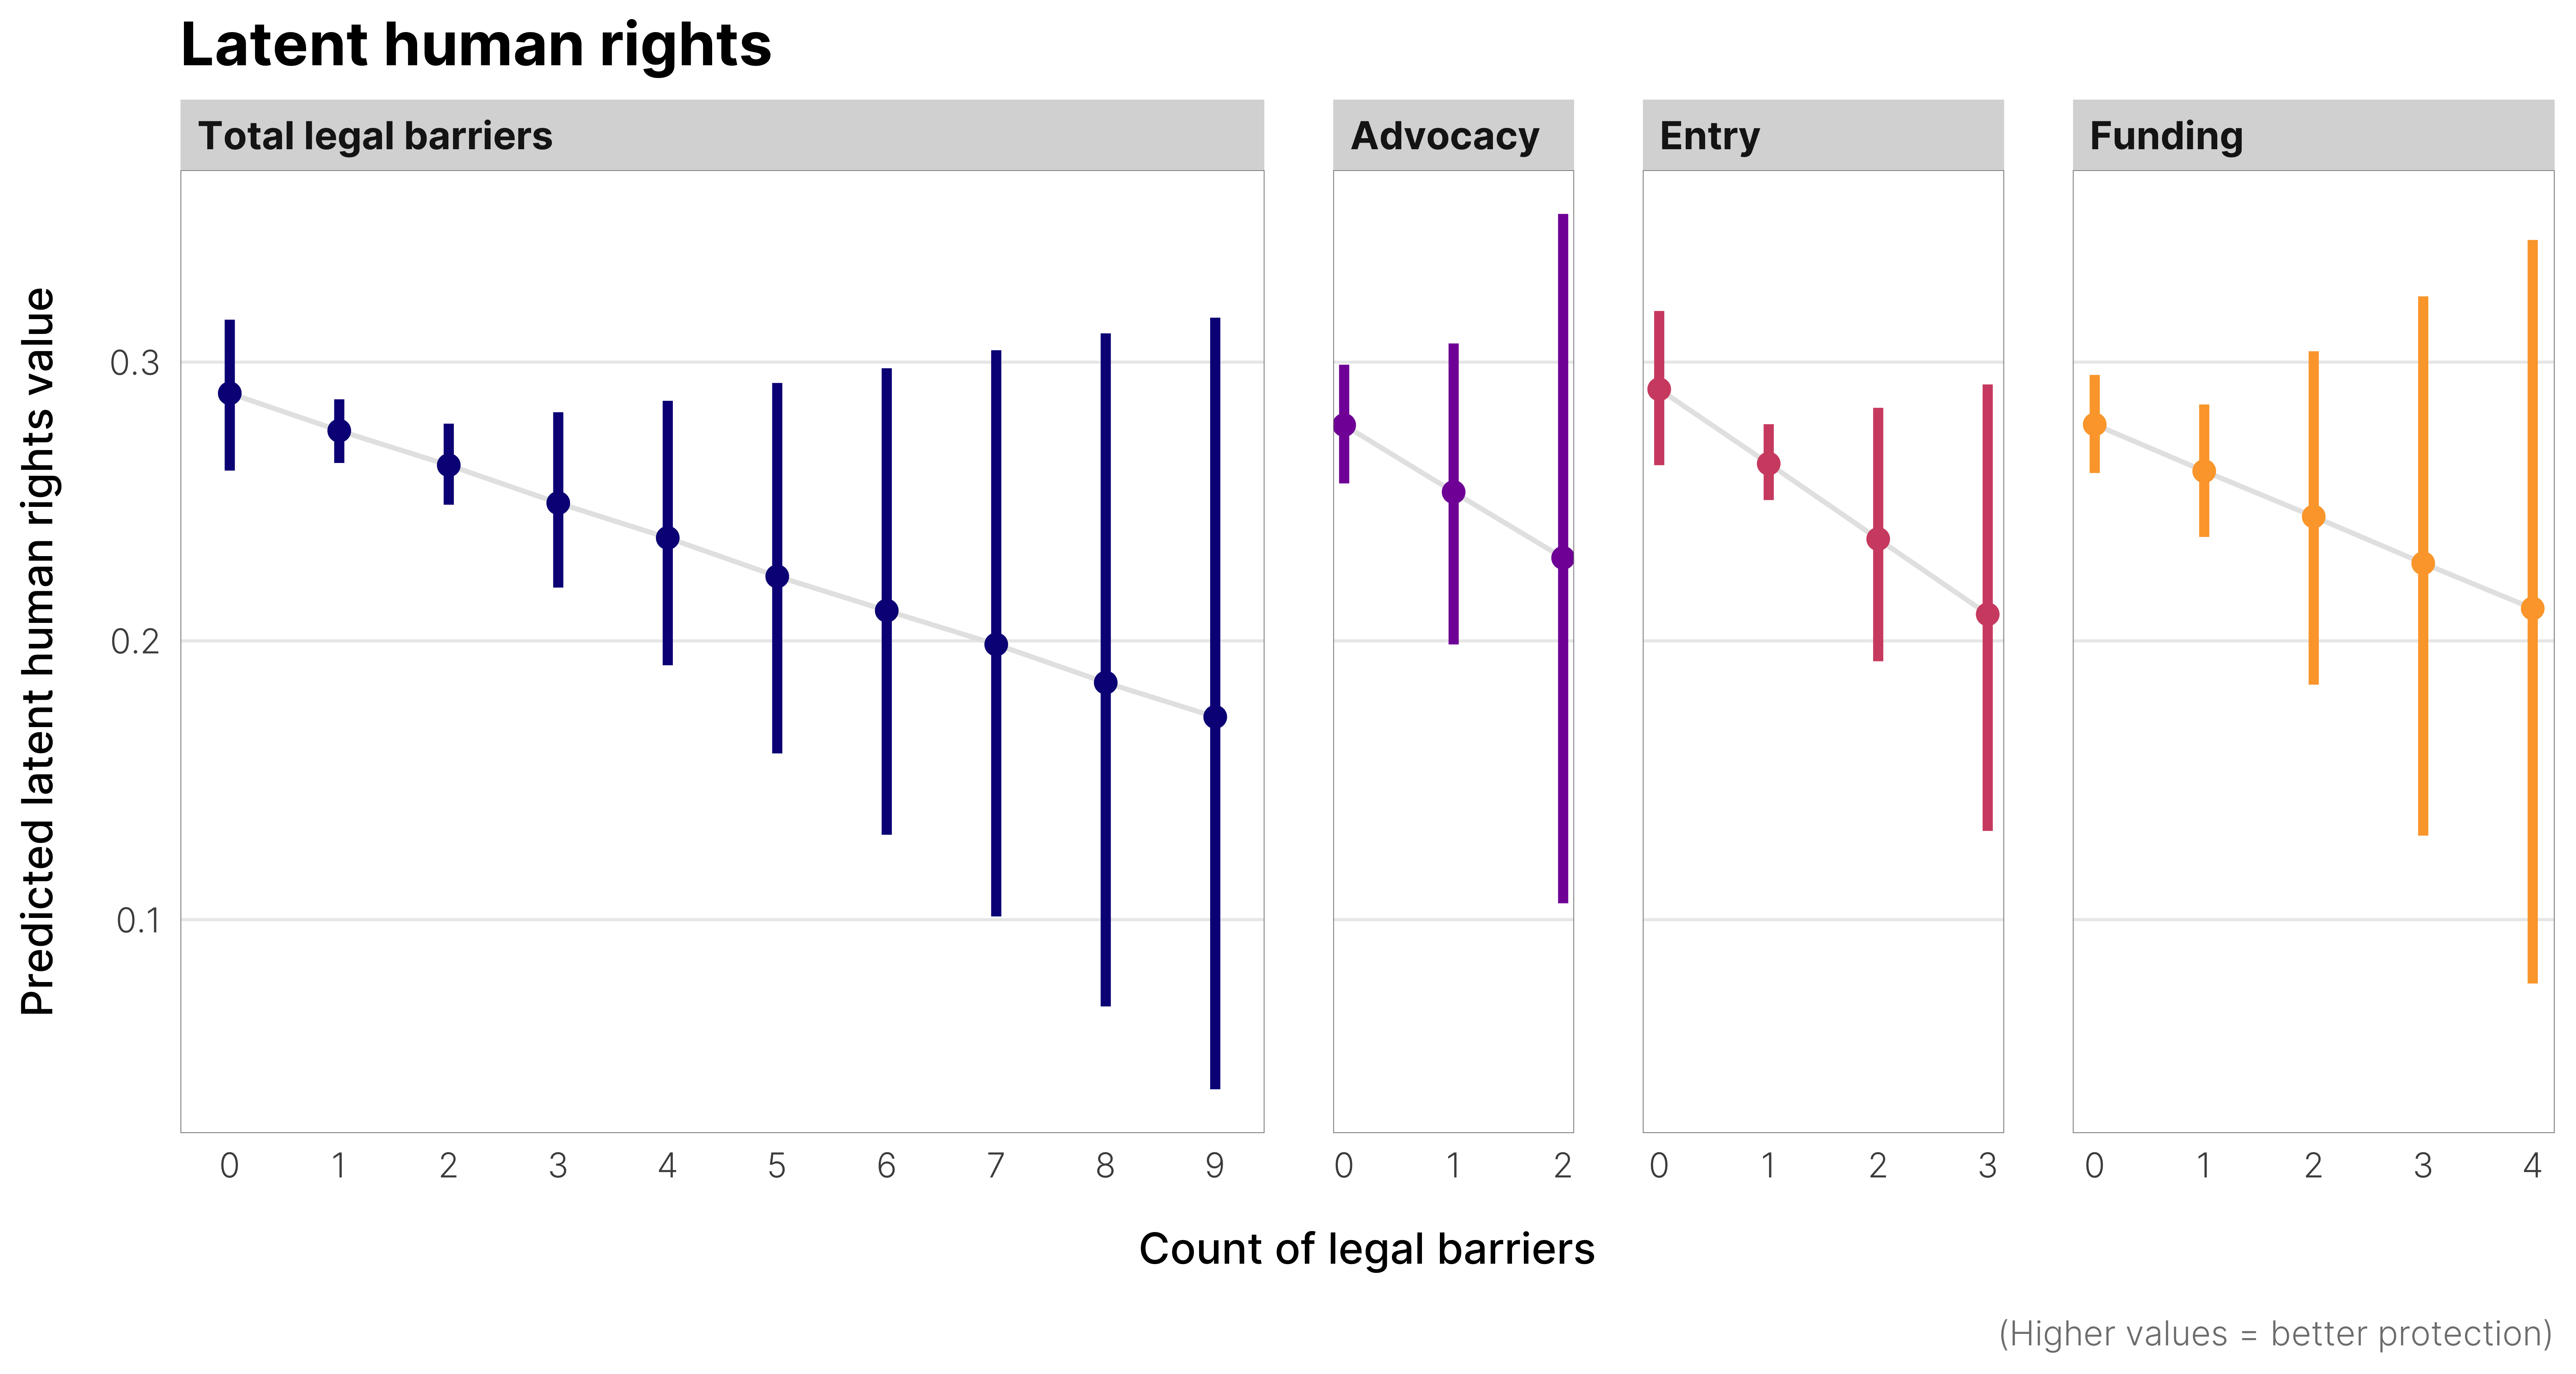 Marginal effects of increasing anti-NGO legal barriers on latent human rights values